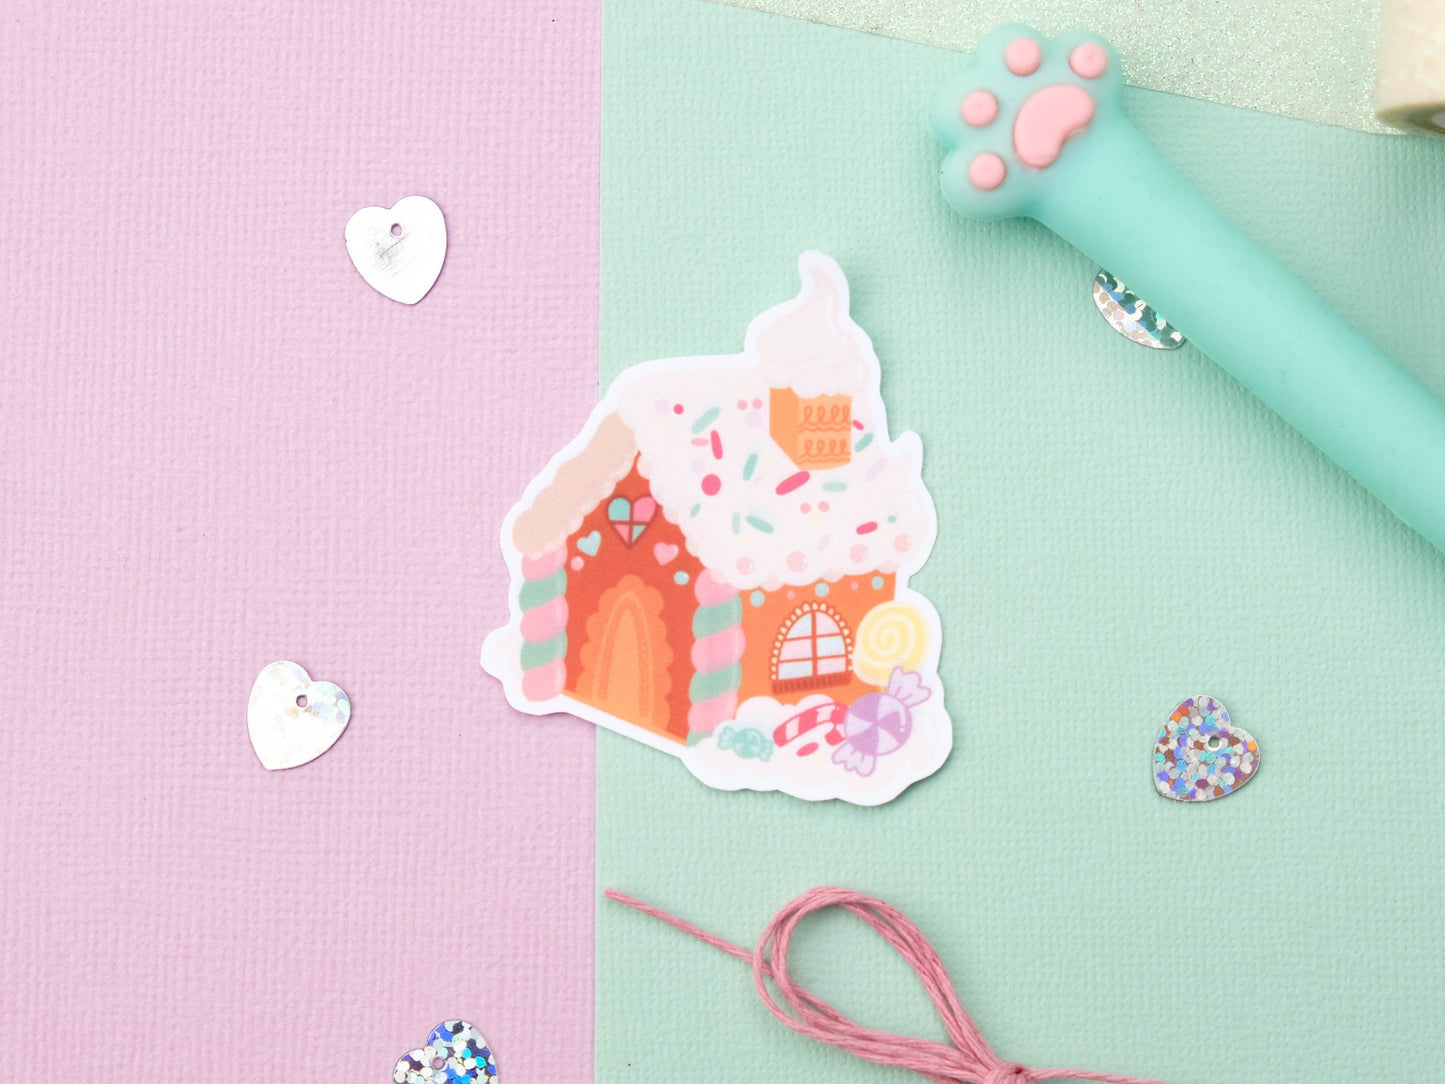 Cute Sticker water resistant Gingerbread House for Christmas perfect to decorate every surface